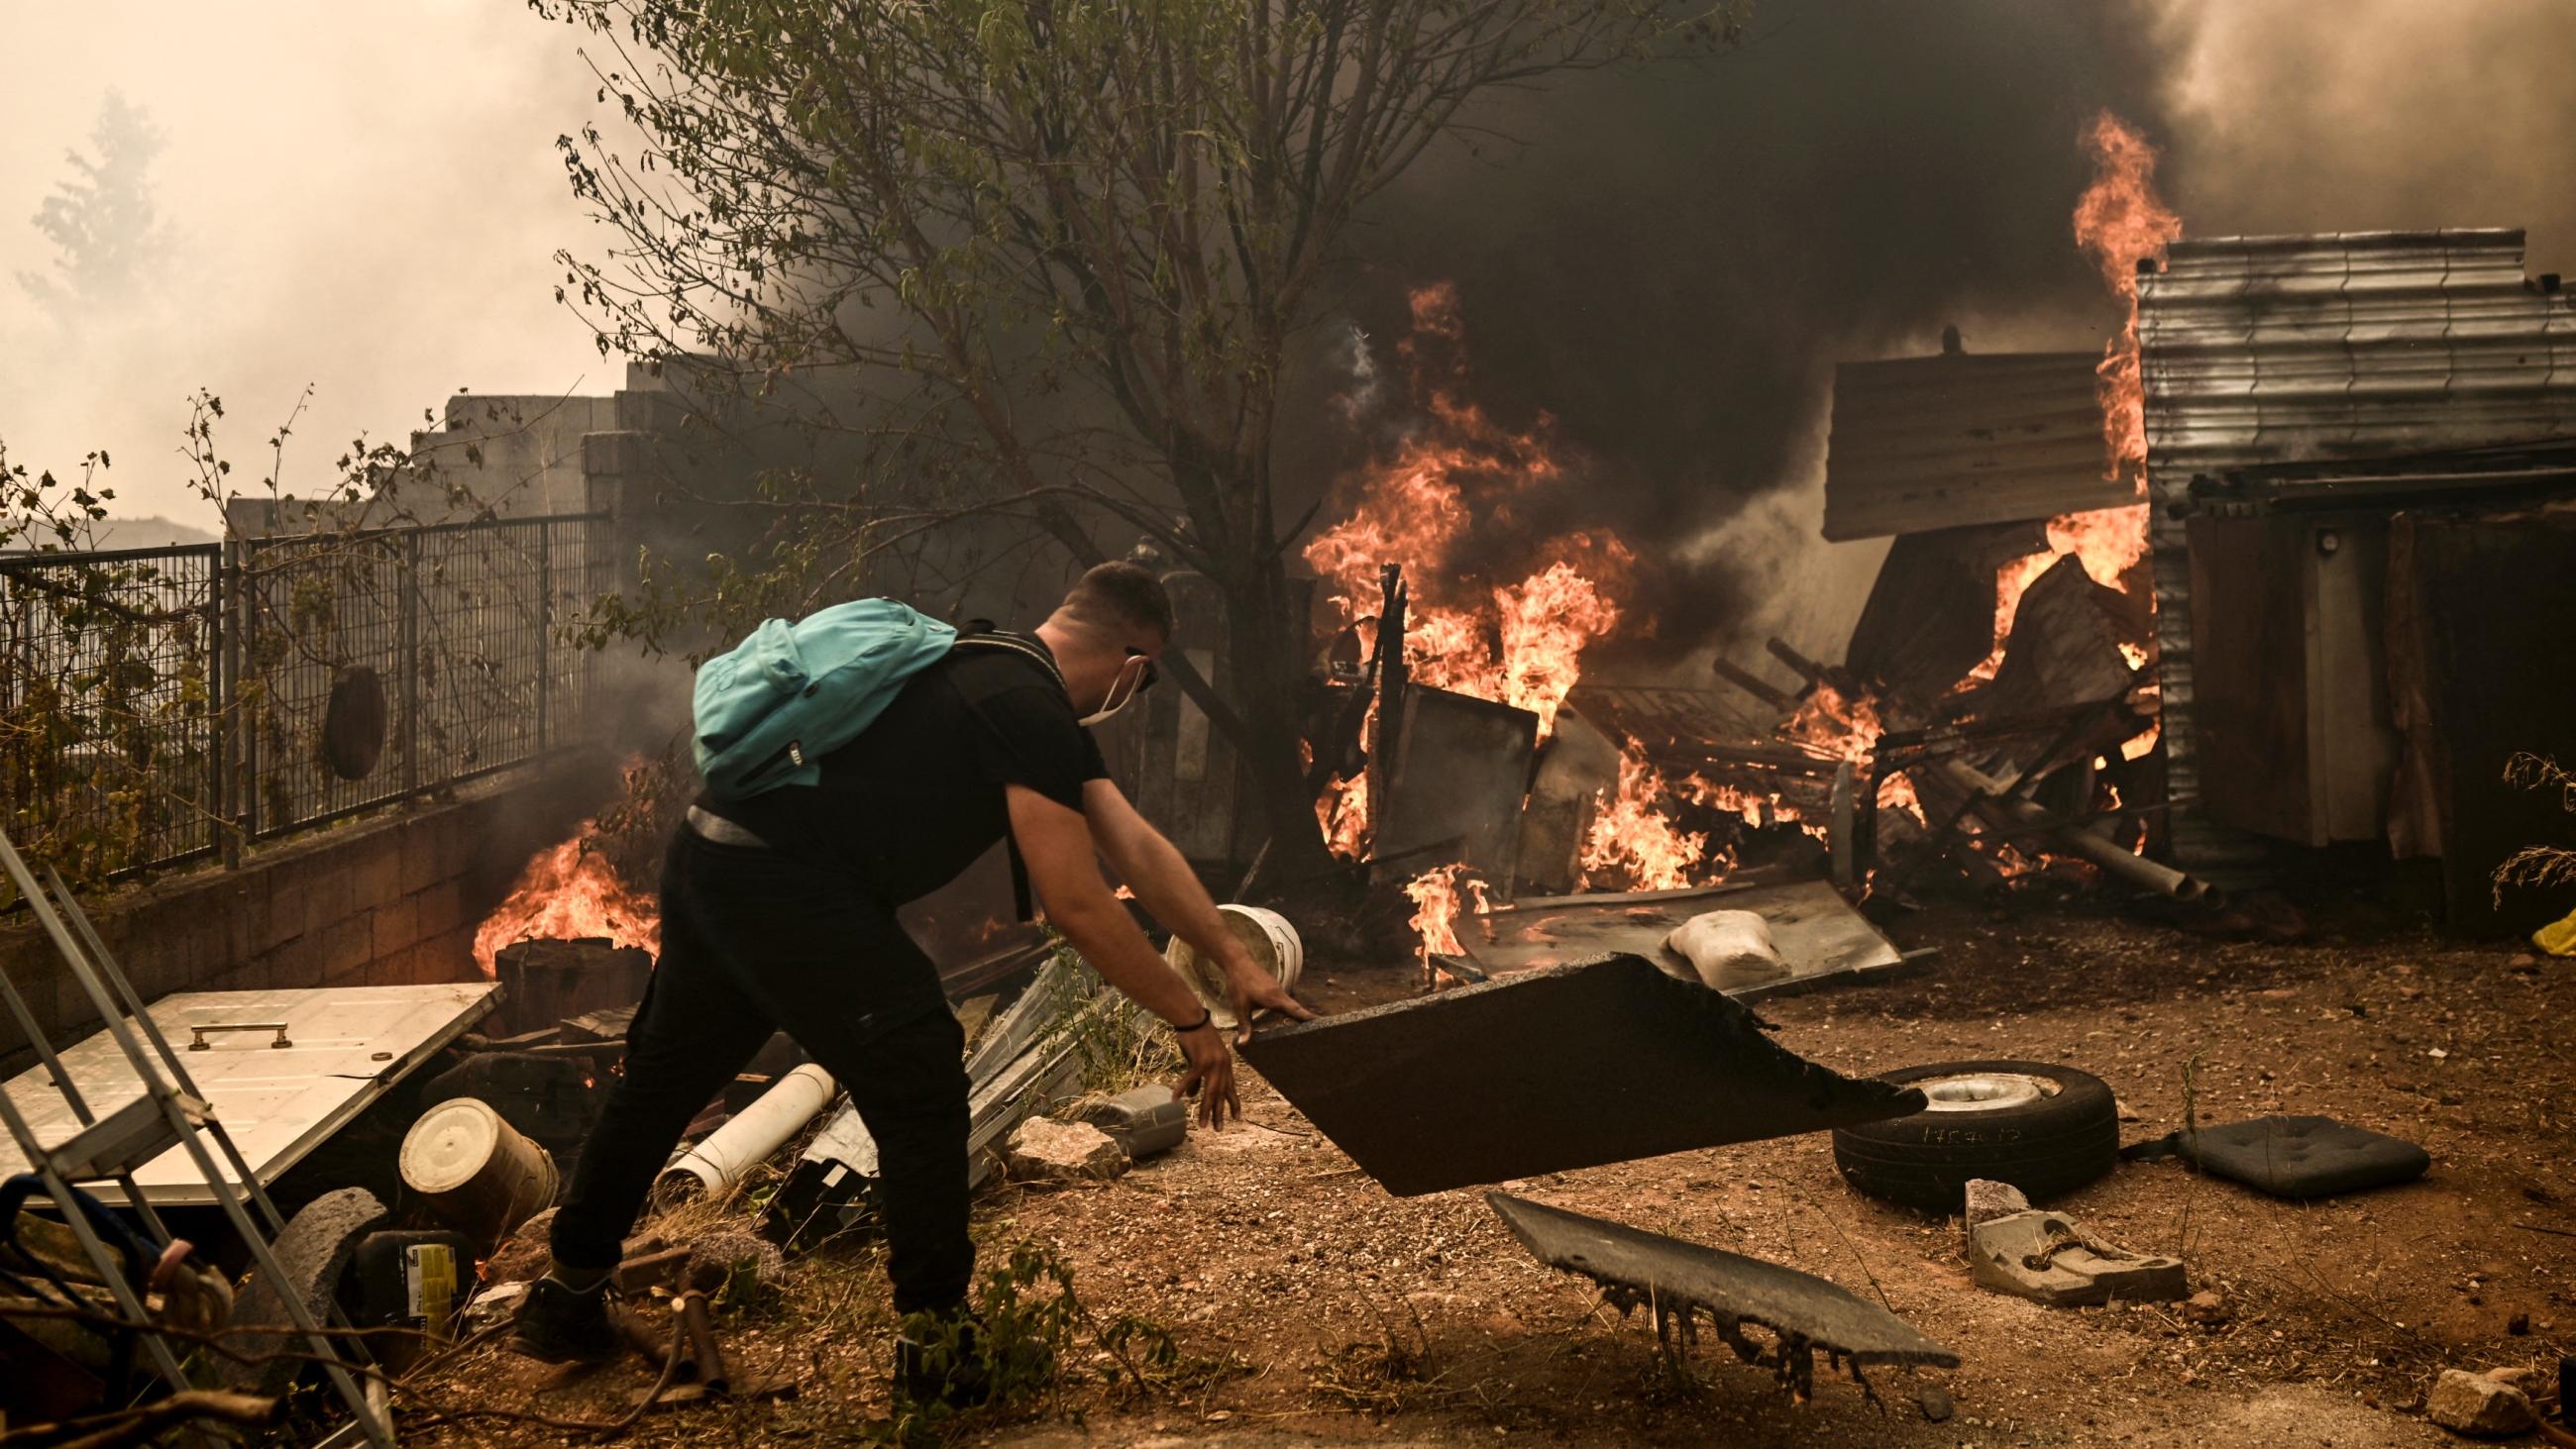 A local resident removes pieces of wood as a wildfire spreads near a house in Acharnes, north of Athens, on 23 August 2023 (AFP)